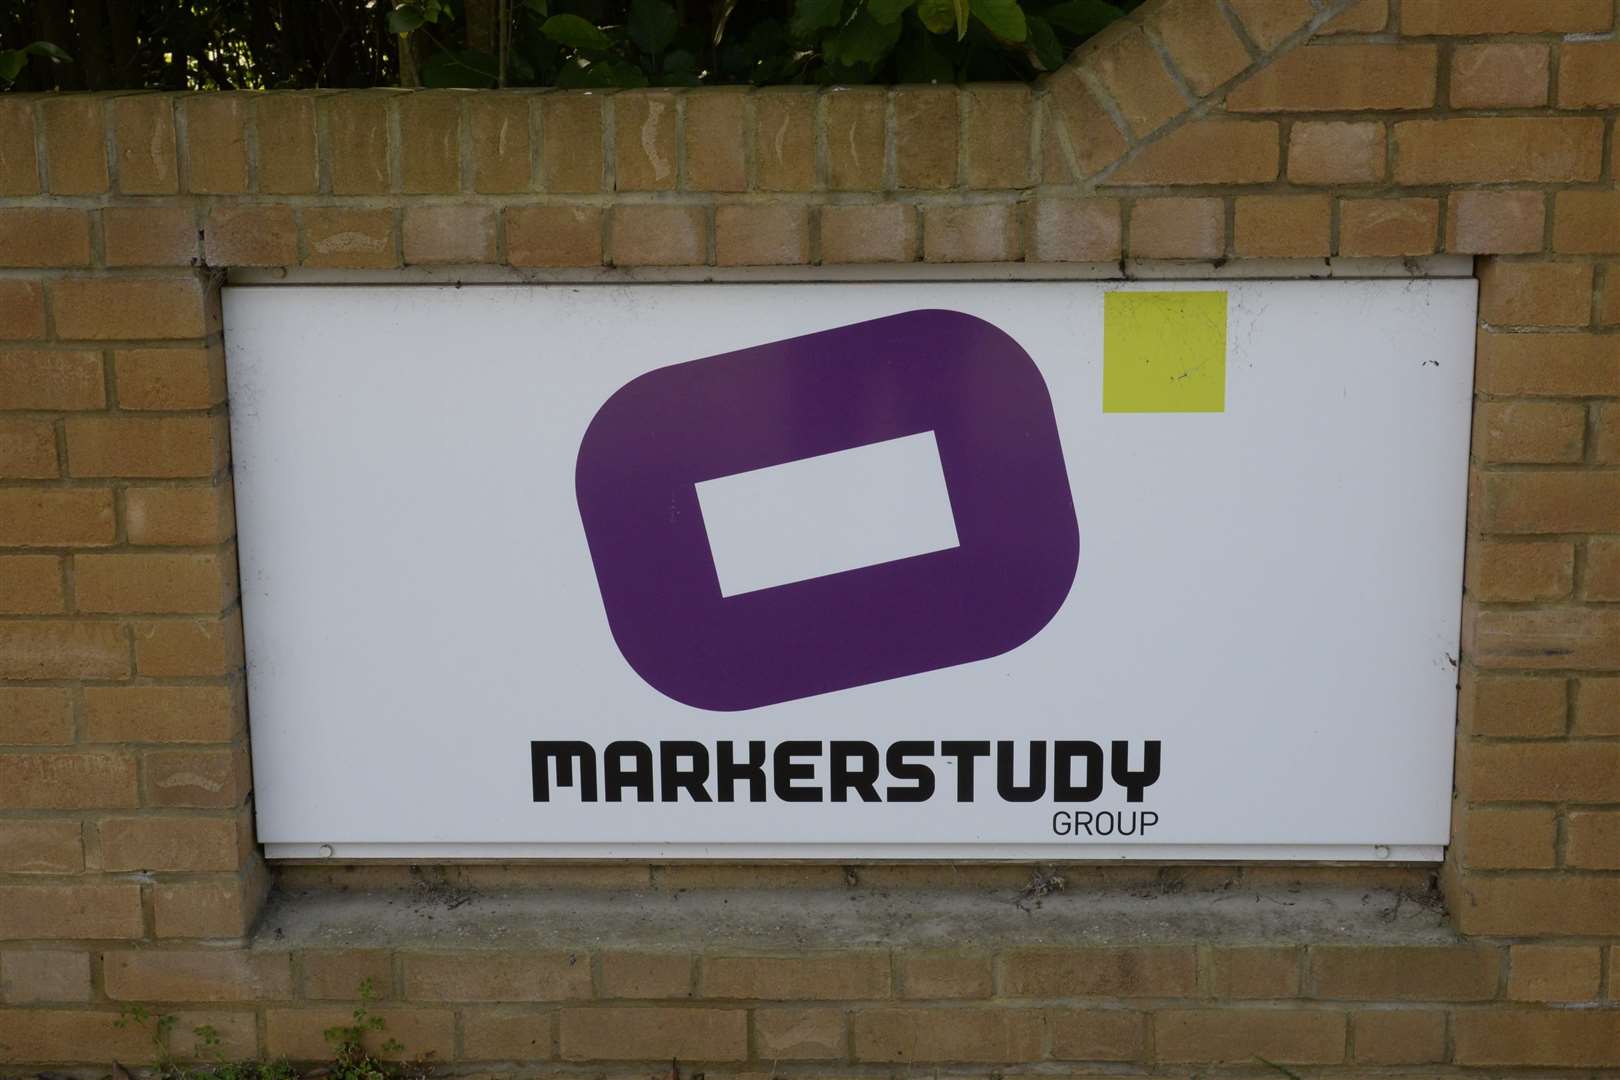 Markerstudy Group is continuing to grow after the acquisition